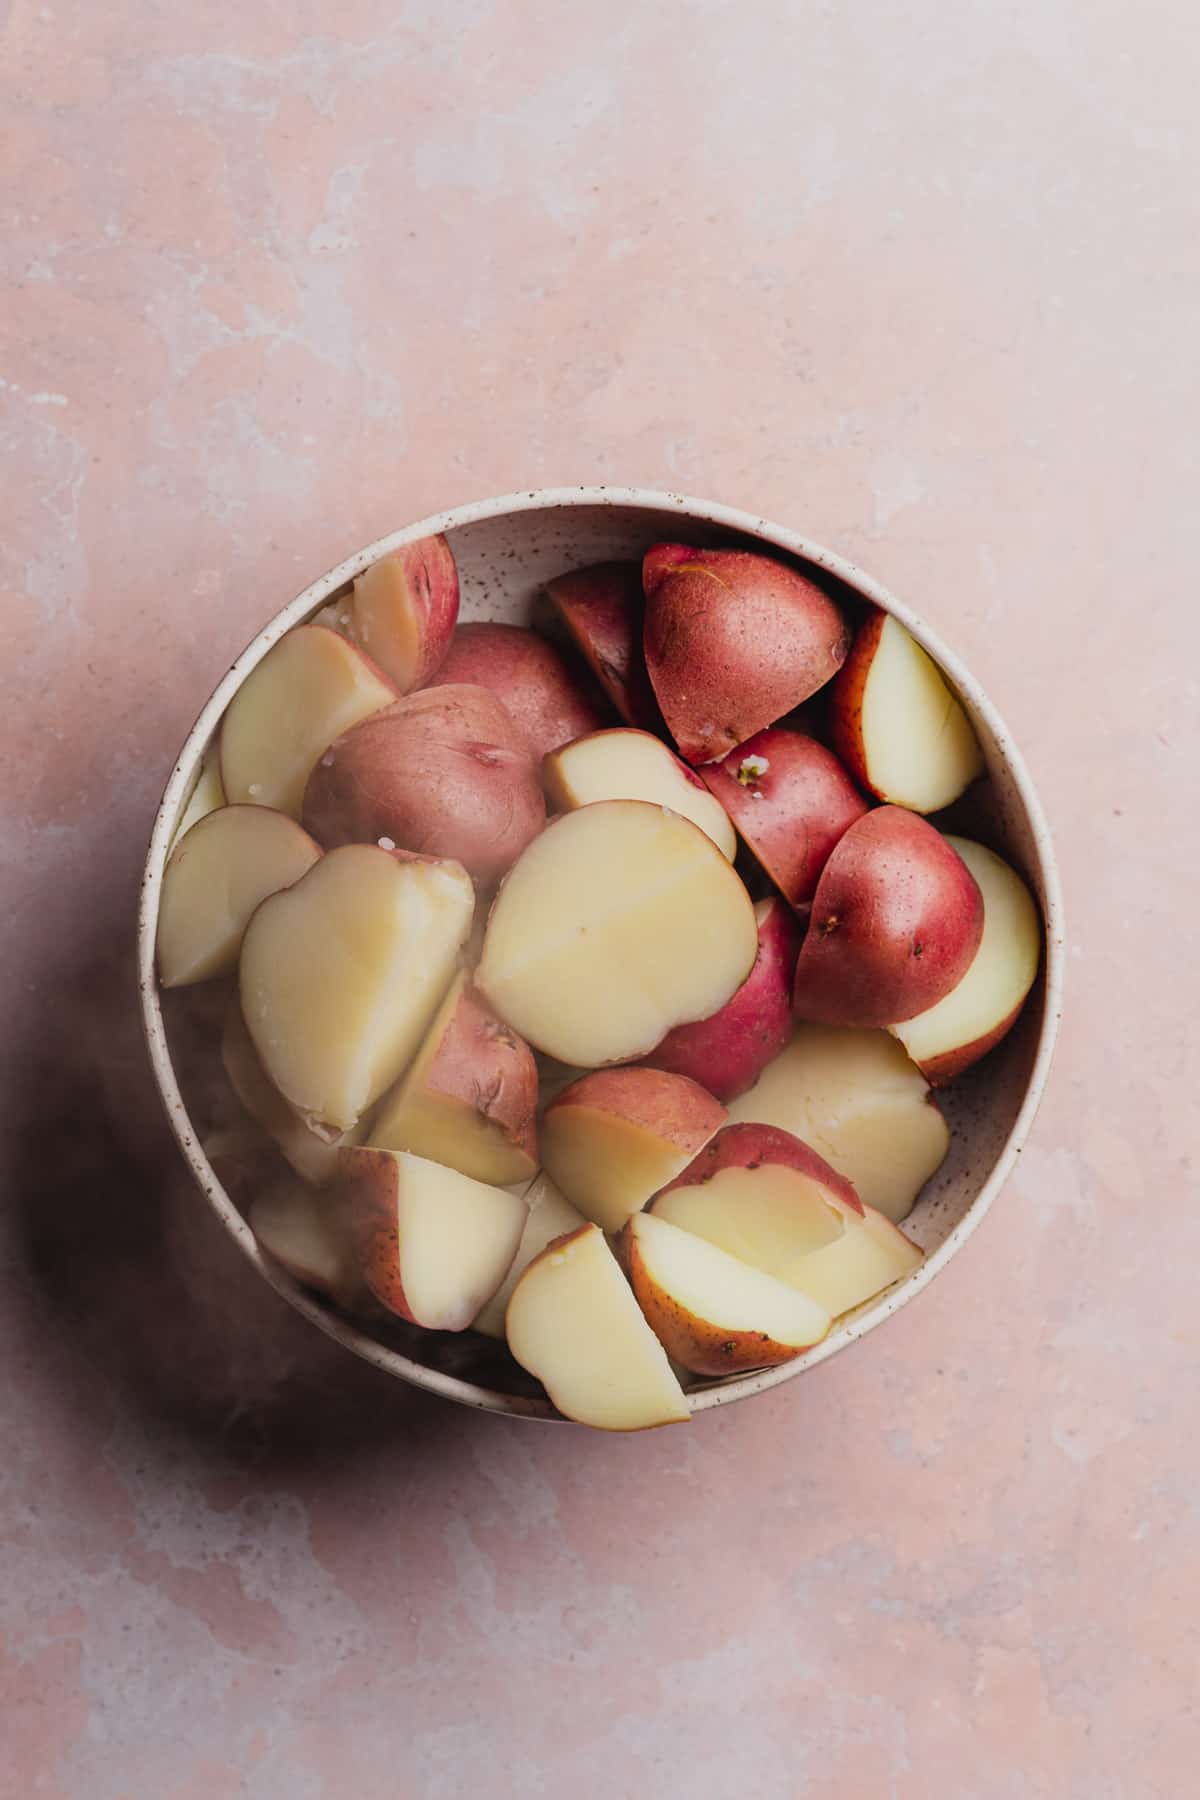 boiled red skin potatoes in a large bowl with steam coming off